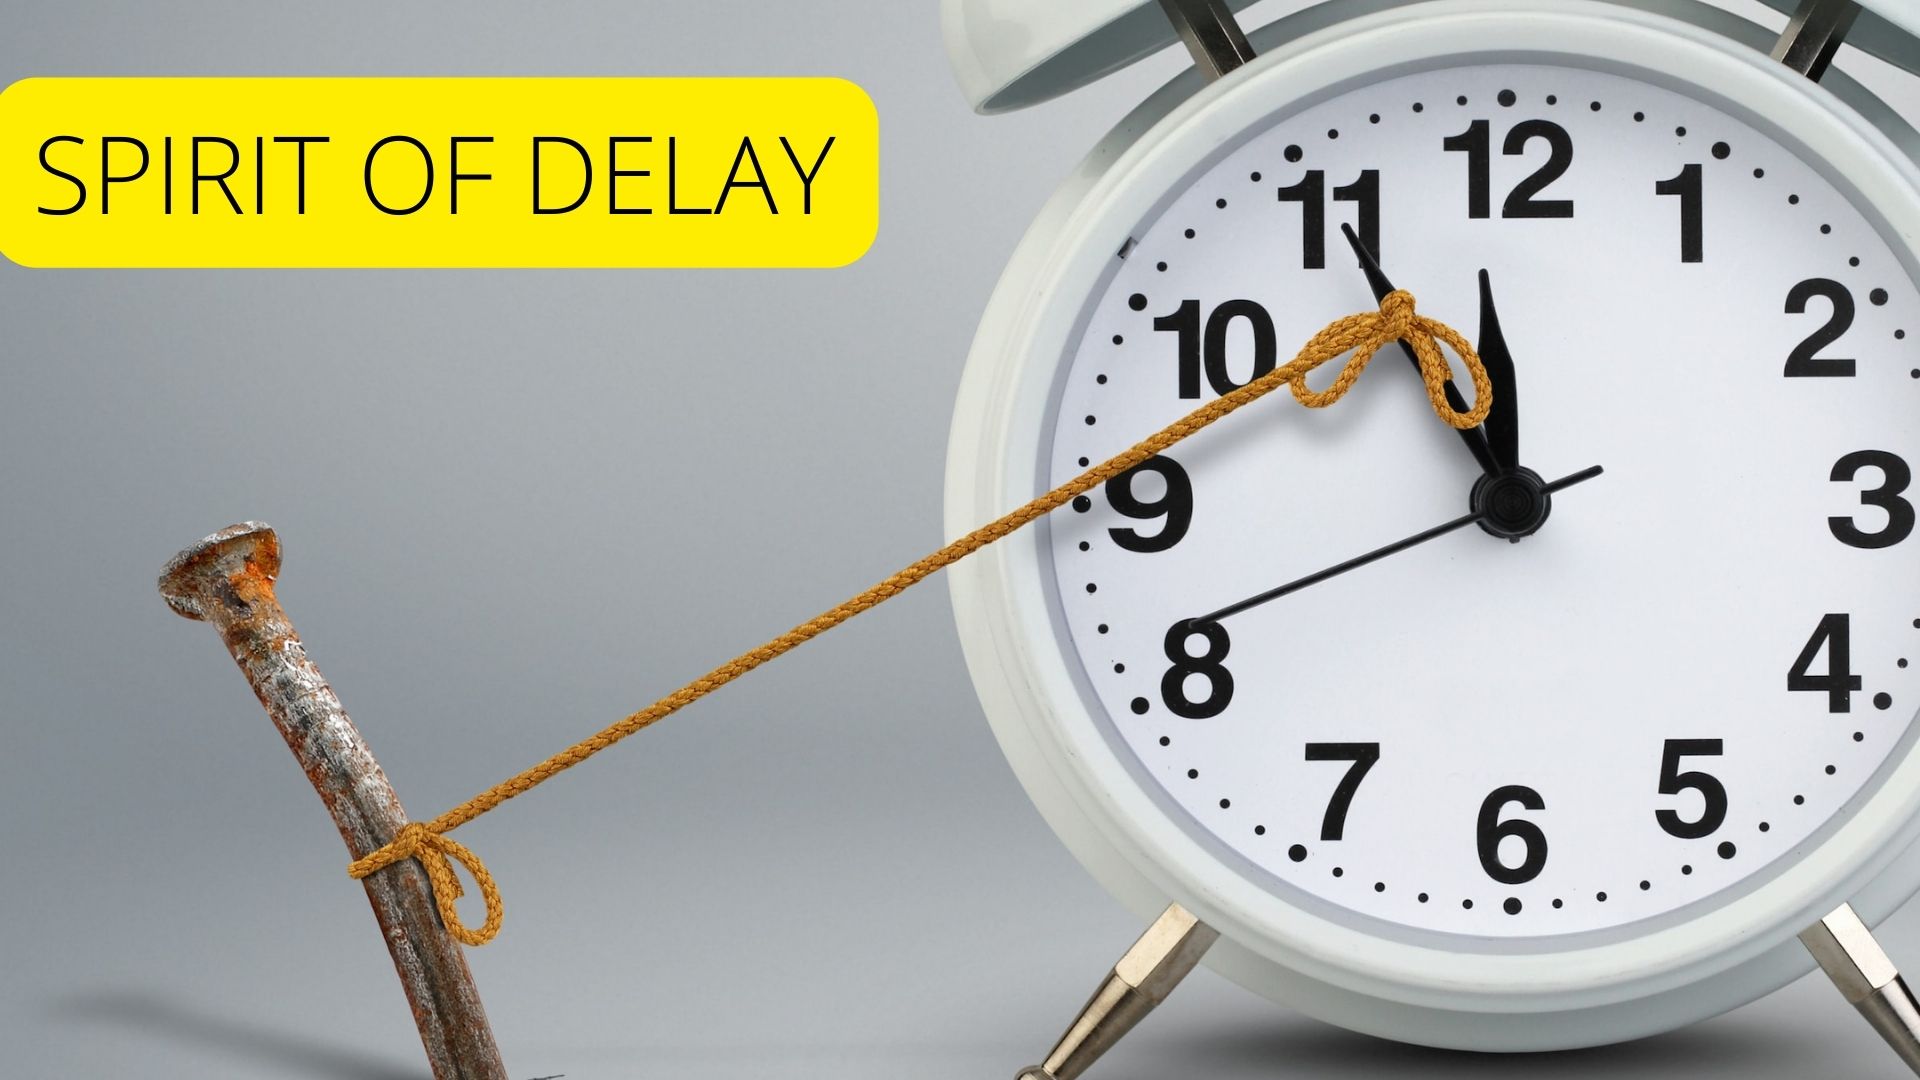 Spirit Of Delay - Setback And Missed Opportunities